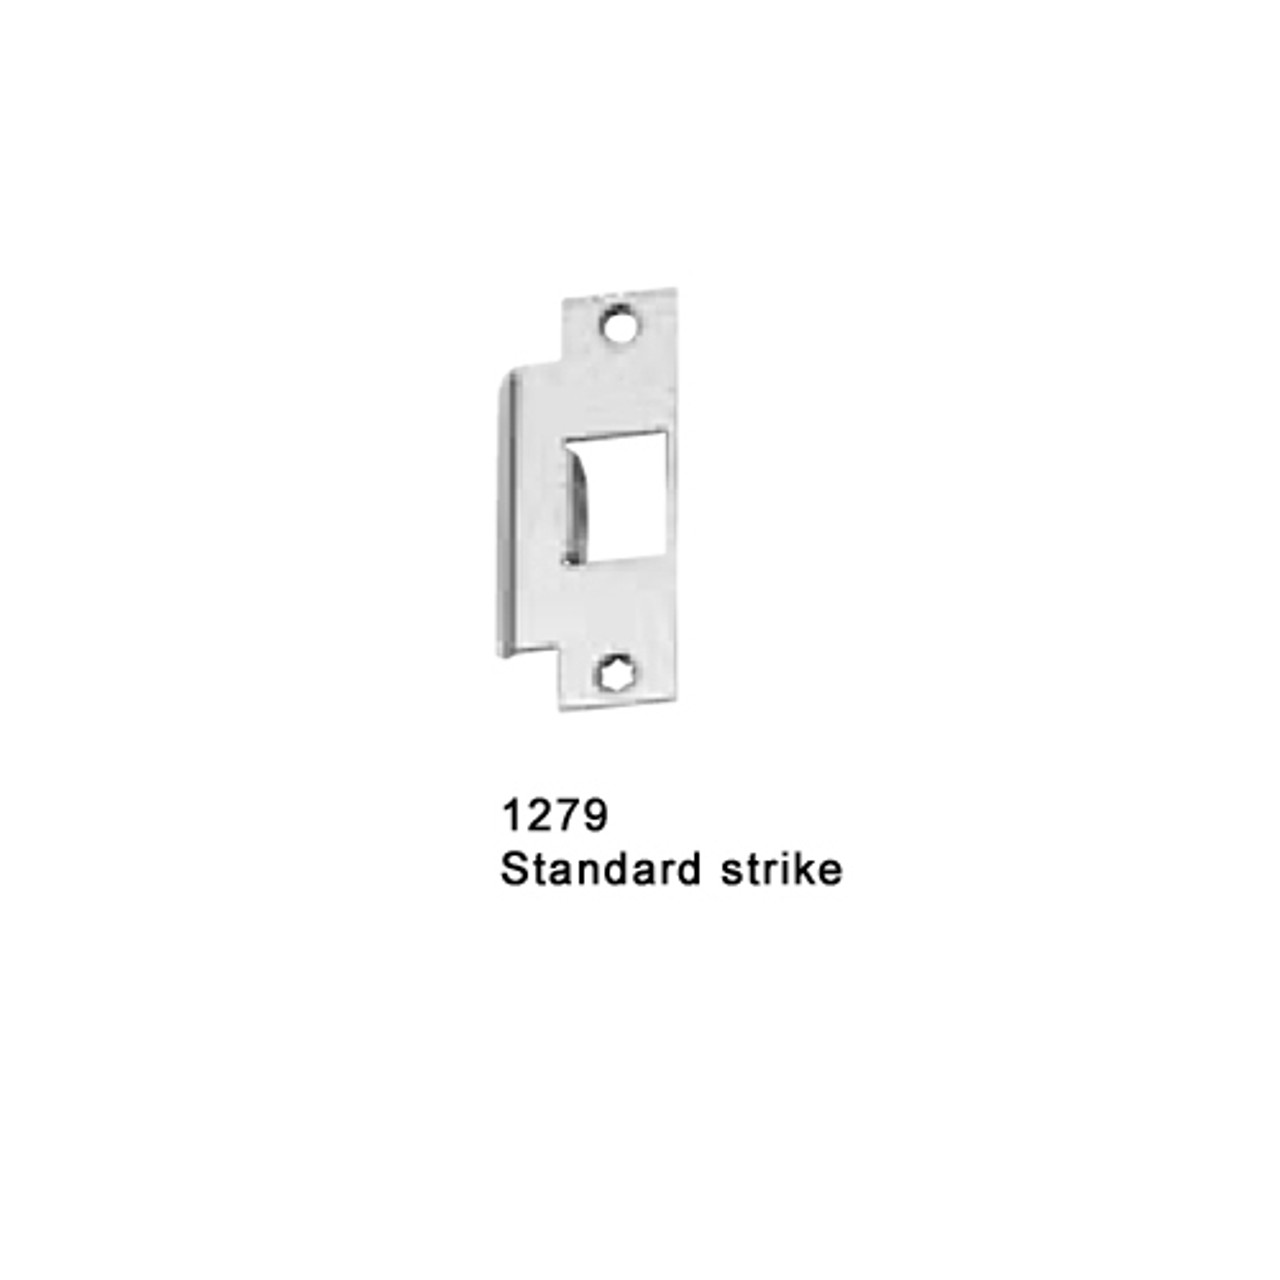 F-25-M-NL-OP-US28-3-RHR Falcon 25 Series Fire Rated Night Latch Optional Pull Mortise Lock Devices with Less Trim in Anodized Aluminum